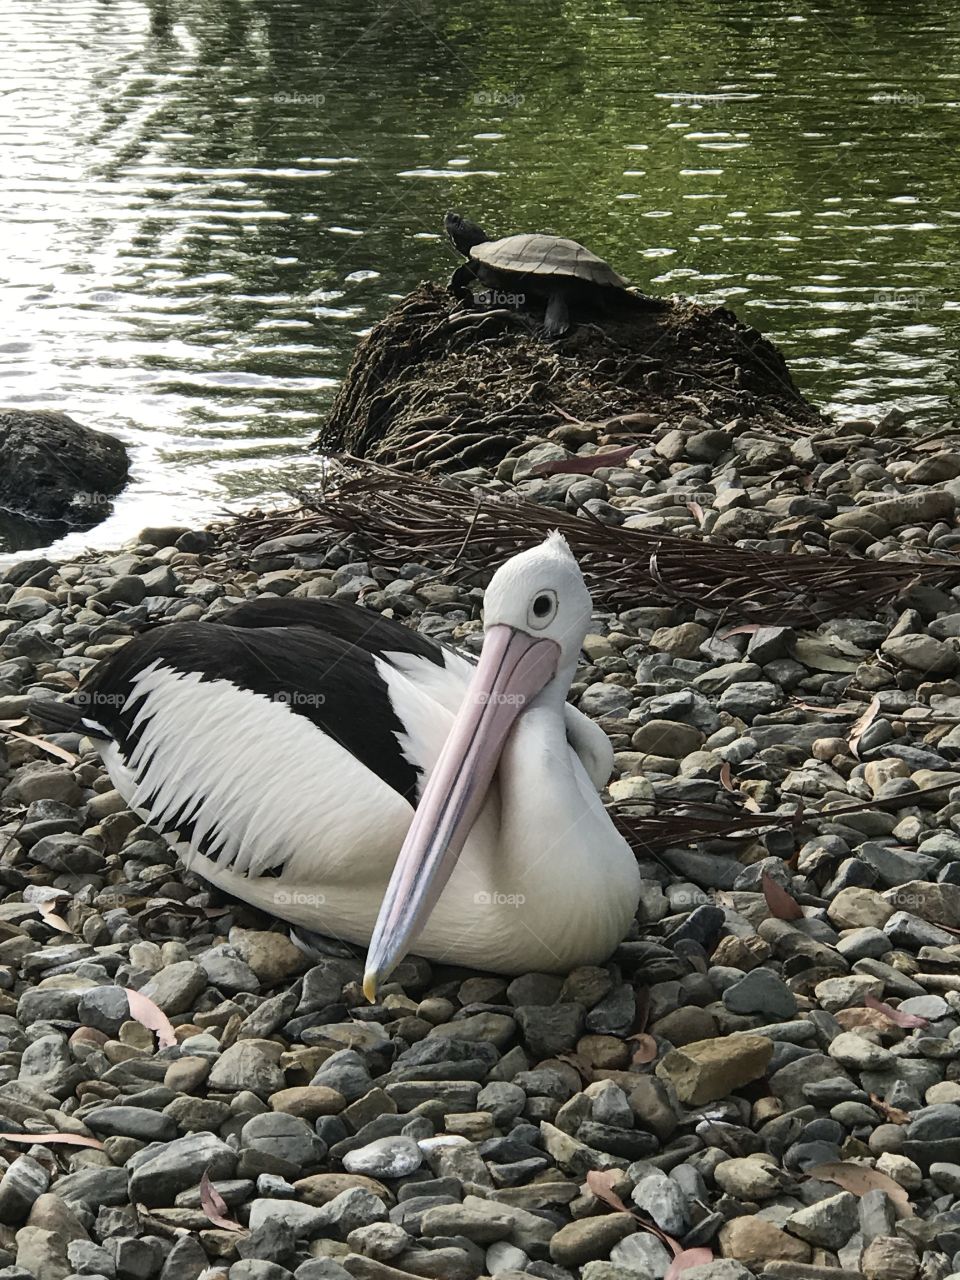 A calm & resting pelican with turtle basking in the winters sun...